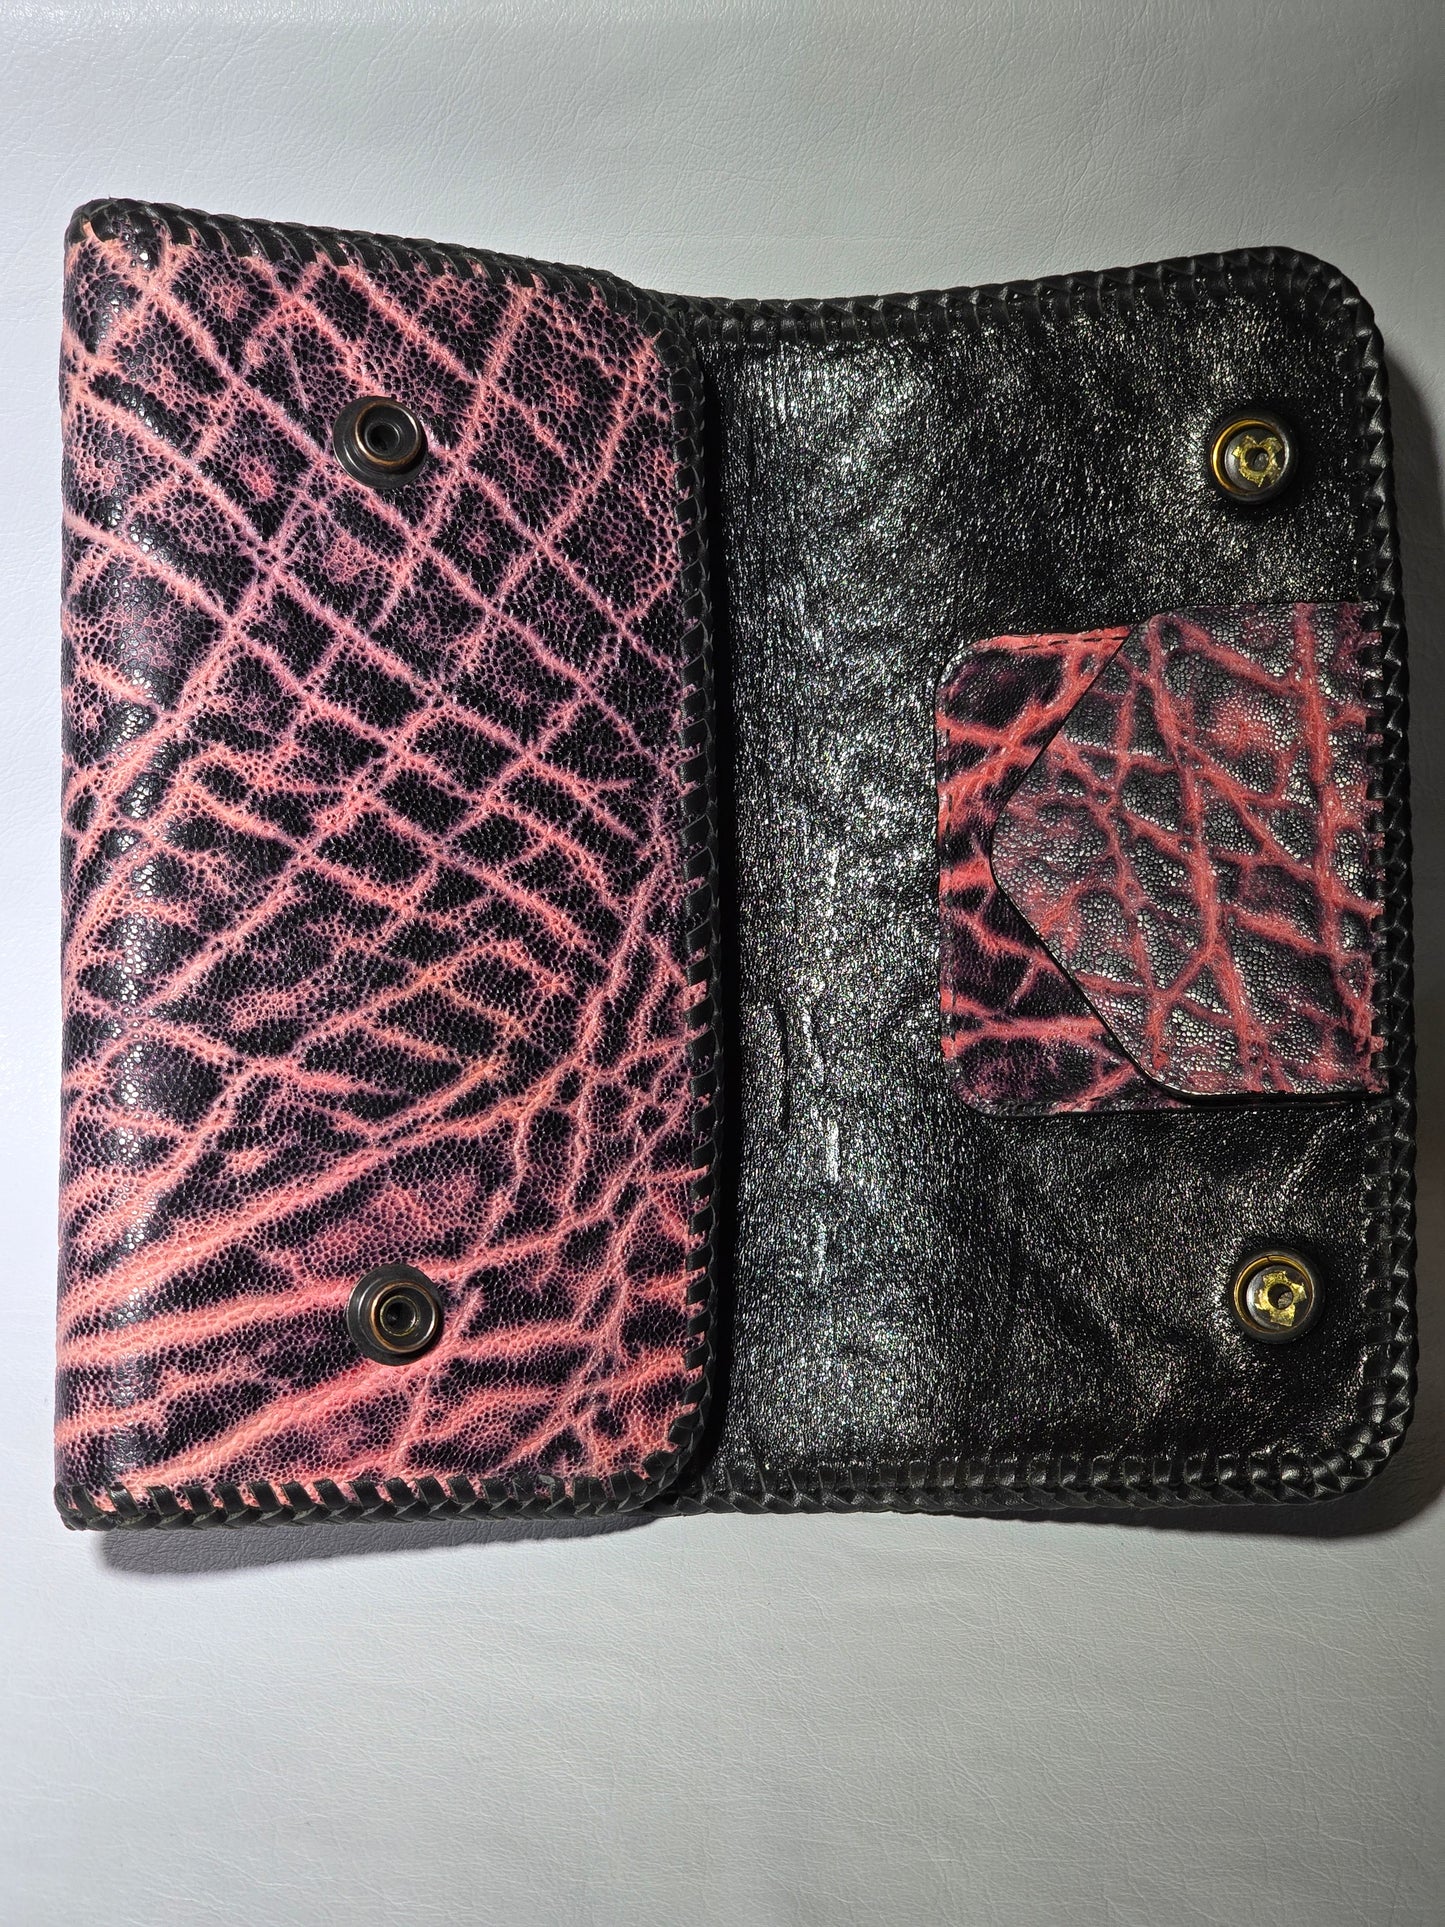 Elephant Large Biker Wallet With Stingray Inlay